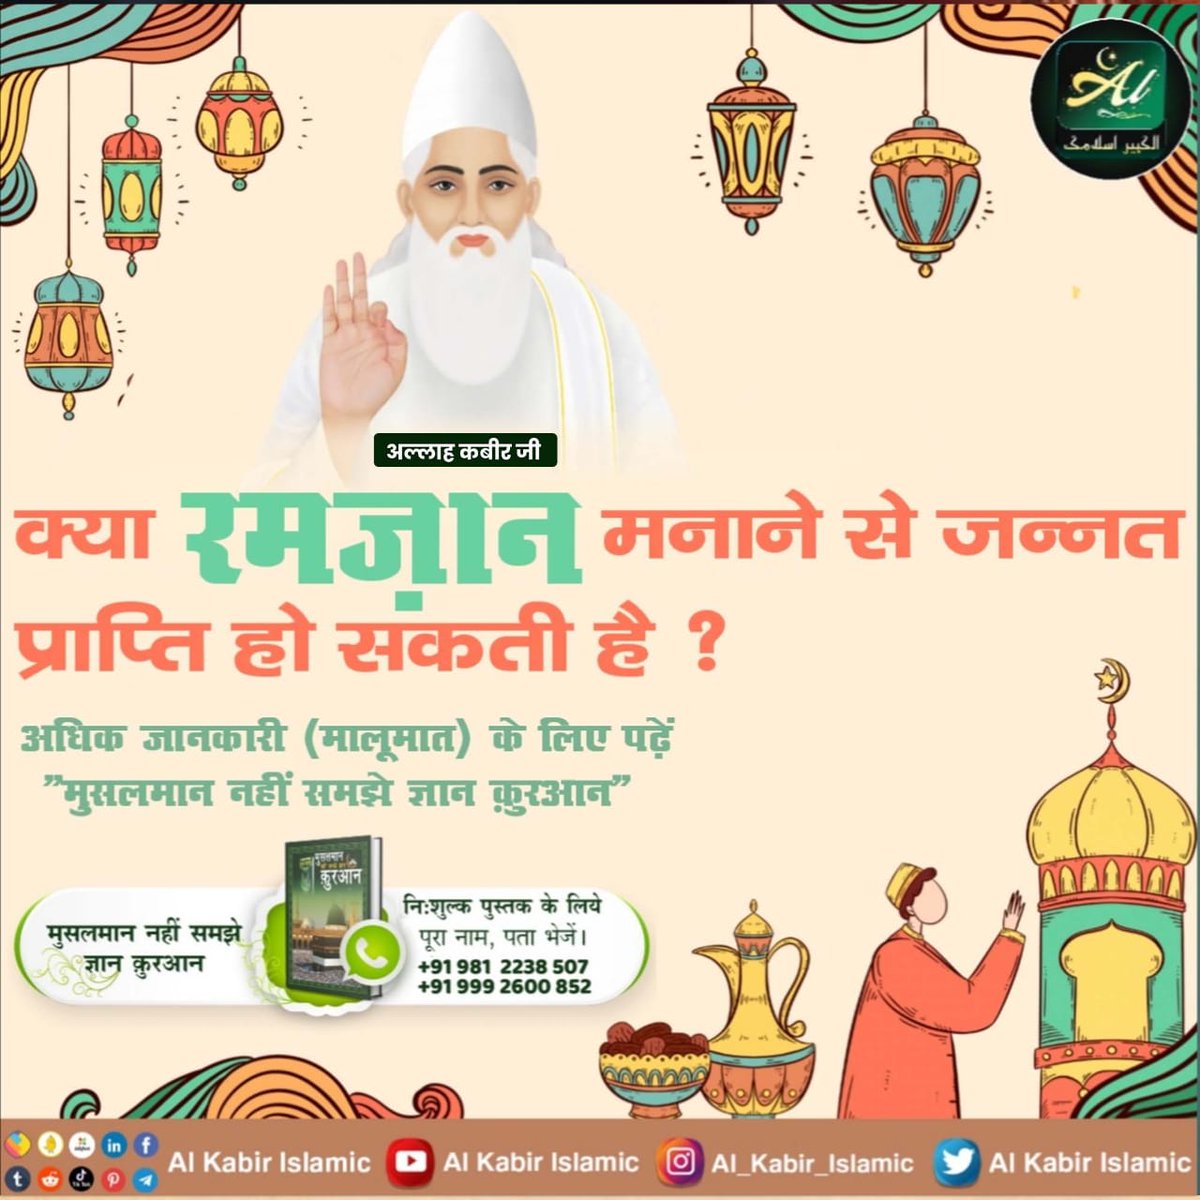 #अल्लाह_का_इल्म_बाखबर_से_पूछो
At the end of Ramadan many are saying happy Ramzan while others are saying Eid-Ul-Fitr Mubarak. But this is only possible if one know that Kabir Saheb is himself Al-Khidr who came & met prophet Muhammad & Moses.
Baakhabar Sant Rampal Ji revealed fact